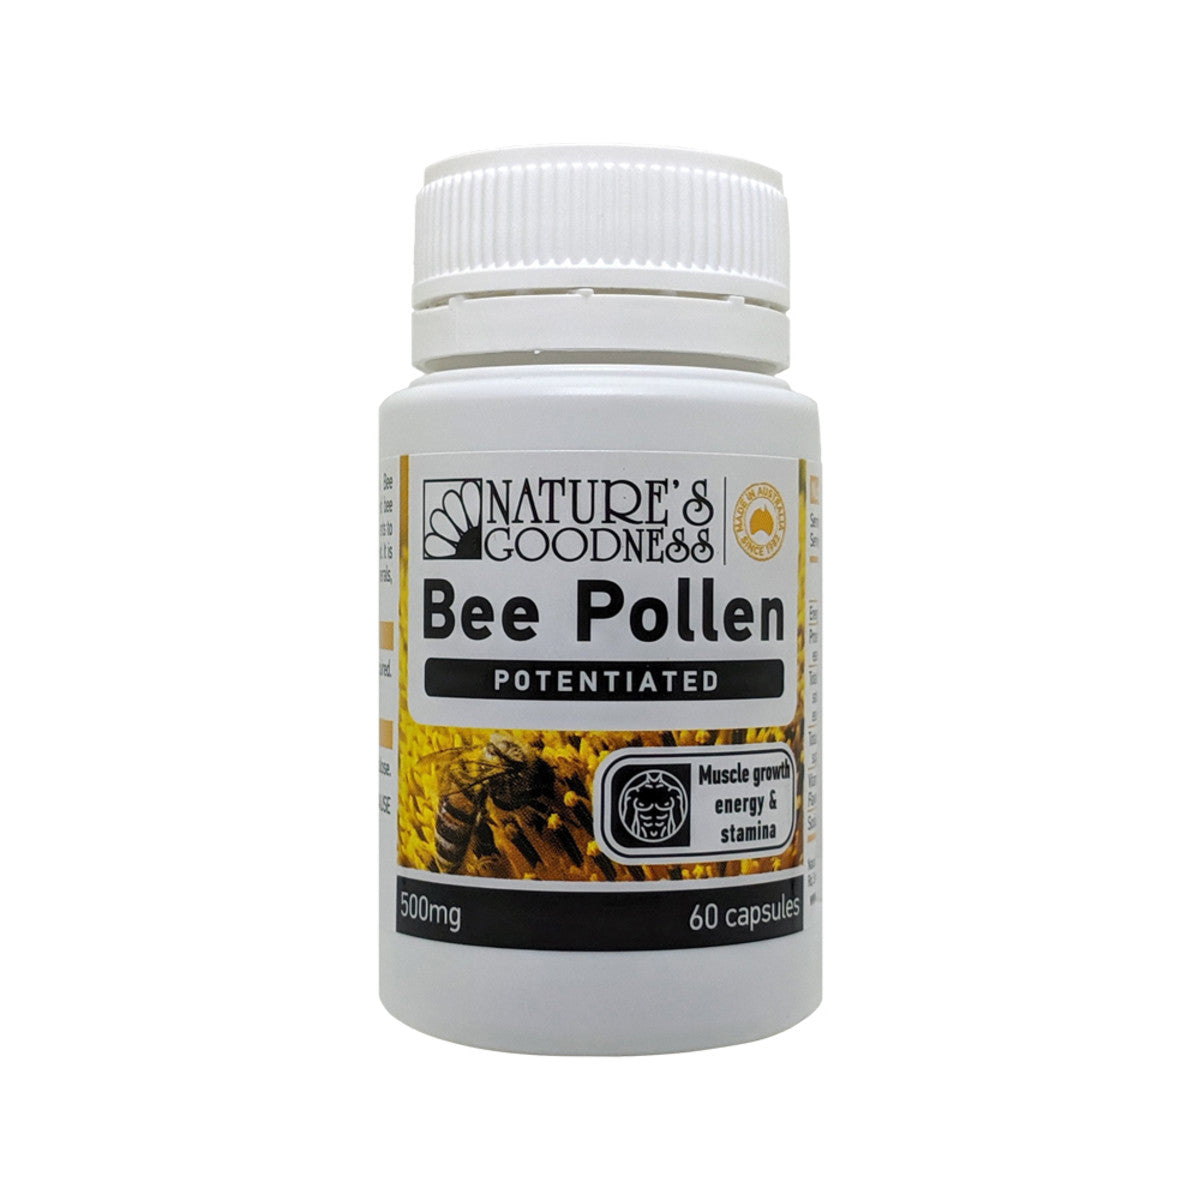 Nat Goodness Bee Pollen Potentiated (Activ) 500mg 60c